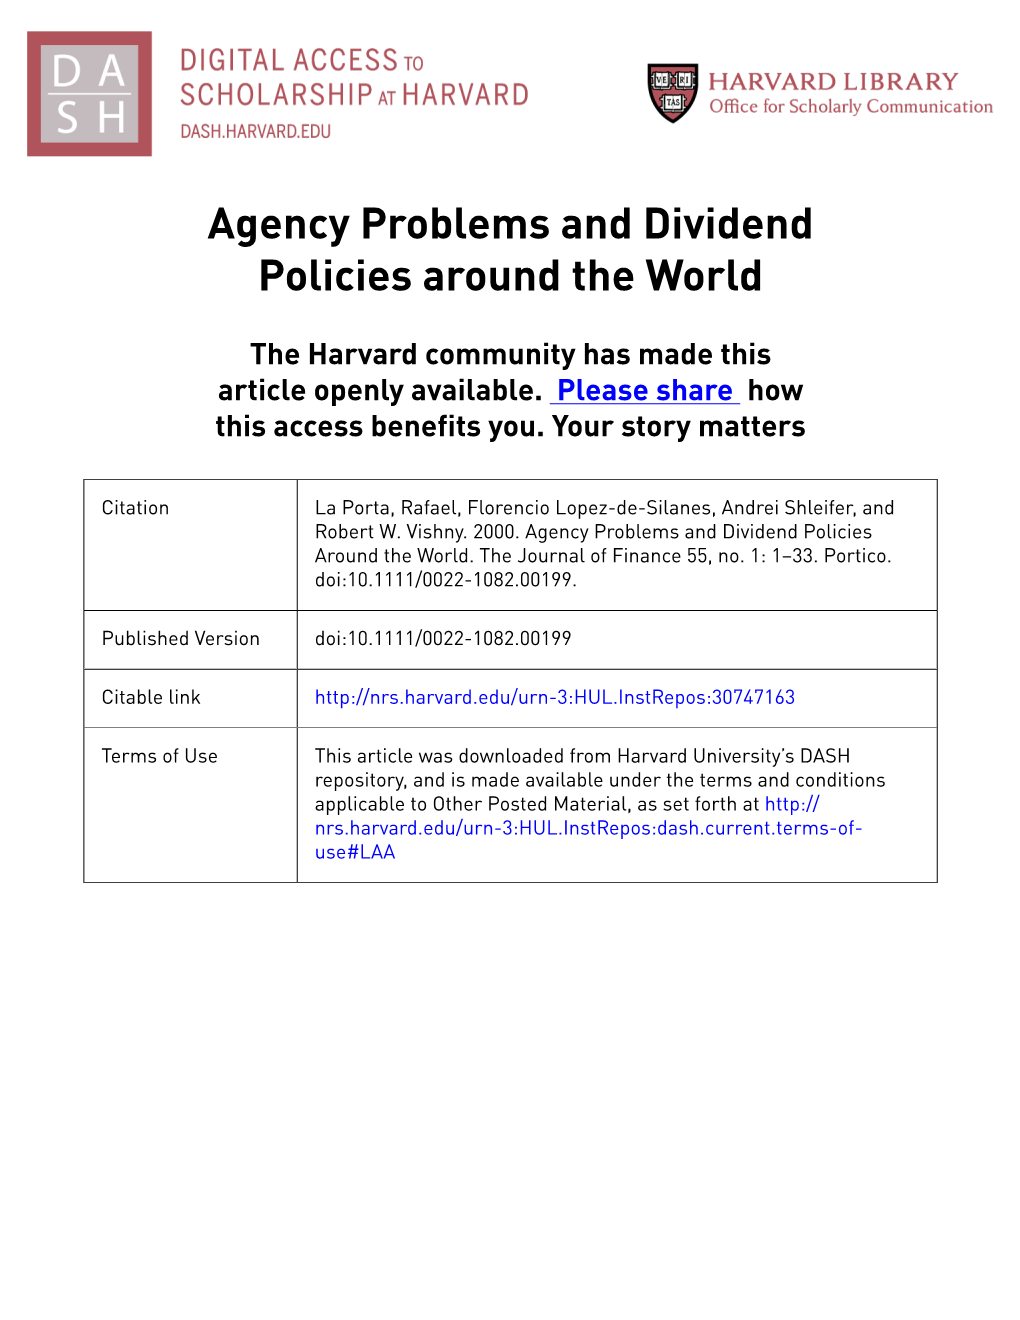 Agency Problems and Dividend Policies Around the World